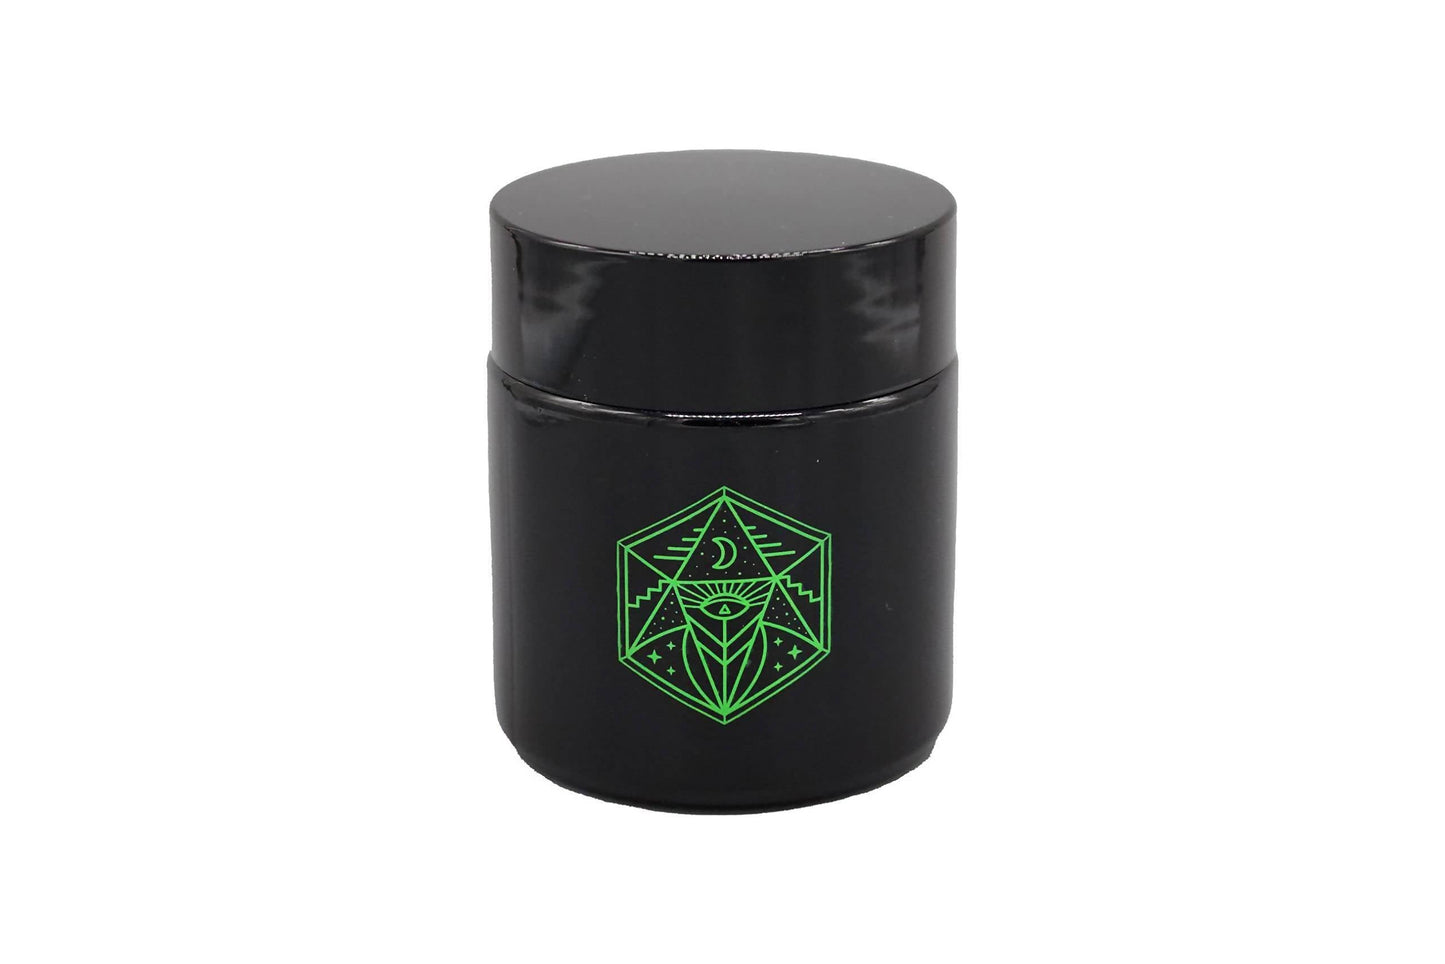 Small Glass Storage Jar and Lid - Real Printed Artwork - UV Protection - Helps Keep Goods Fresh with Light Protection- Tinted Black - 100 ml - Ancient Symbol Design - Accessories By Leaf-Way Brand_0